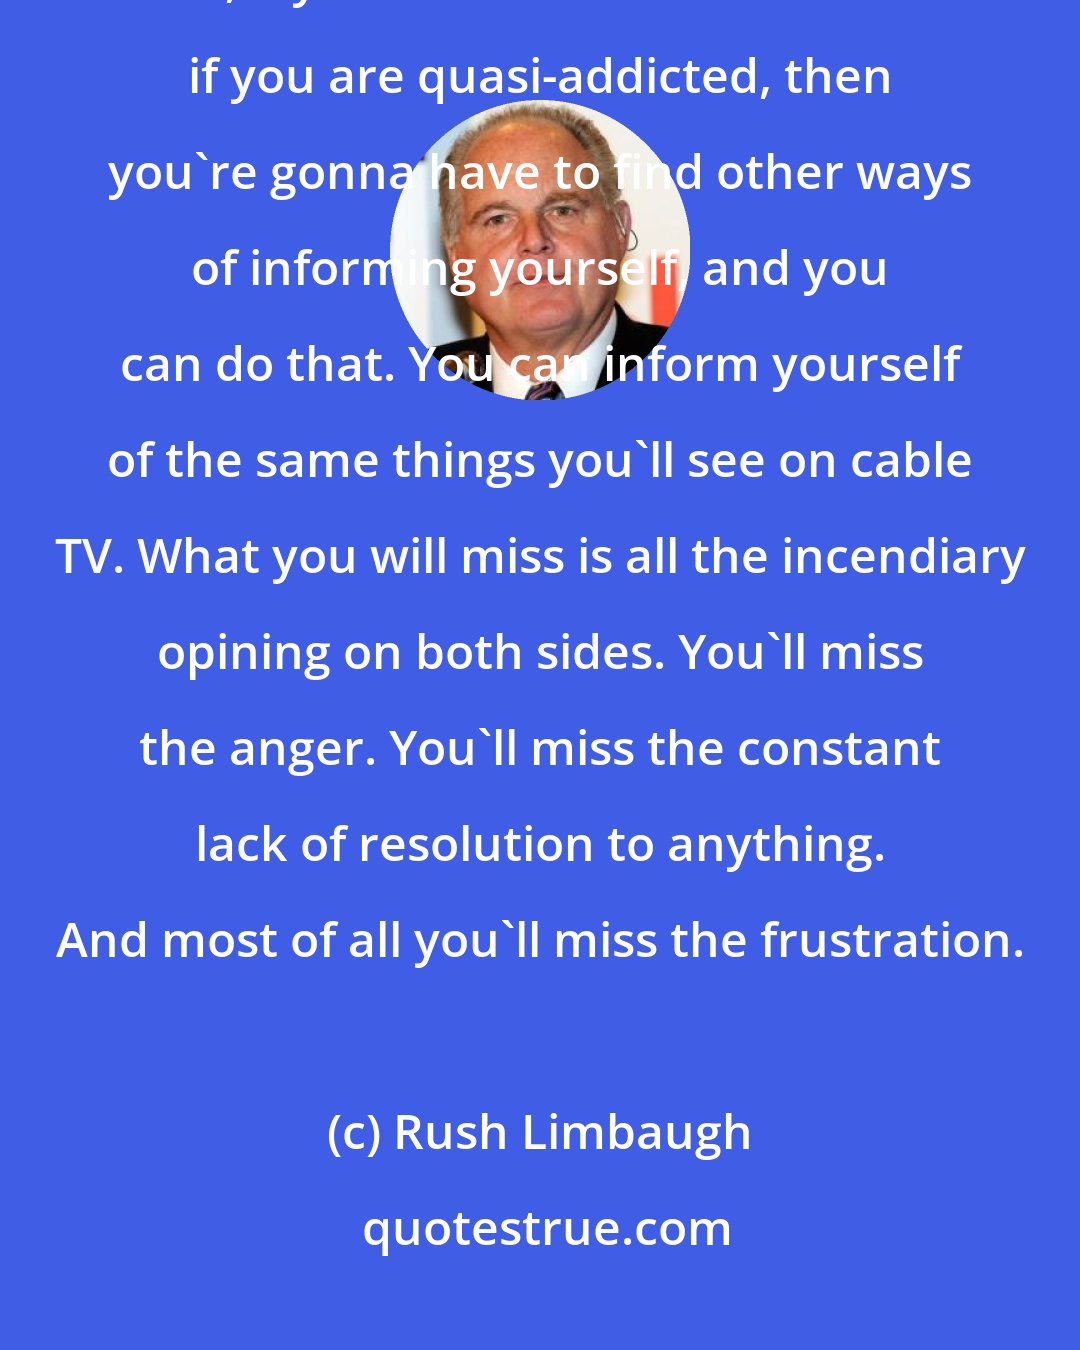 Rush Limbaugh: Try it, folks, try it. Try it for a week without watching cable news. Now, if you're a news consumer and if you are quasi-addicted, then you're gonna have to find other ways of informing yourself, and you can do that. You can inform yourself of the same things you'll see on cable TV. What you will miss is all the incendiary opining on both sides. You'll miss the anger. You'll miss the constant lack of resolution to anything. And most of all you'll miss the frustration.